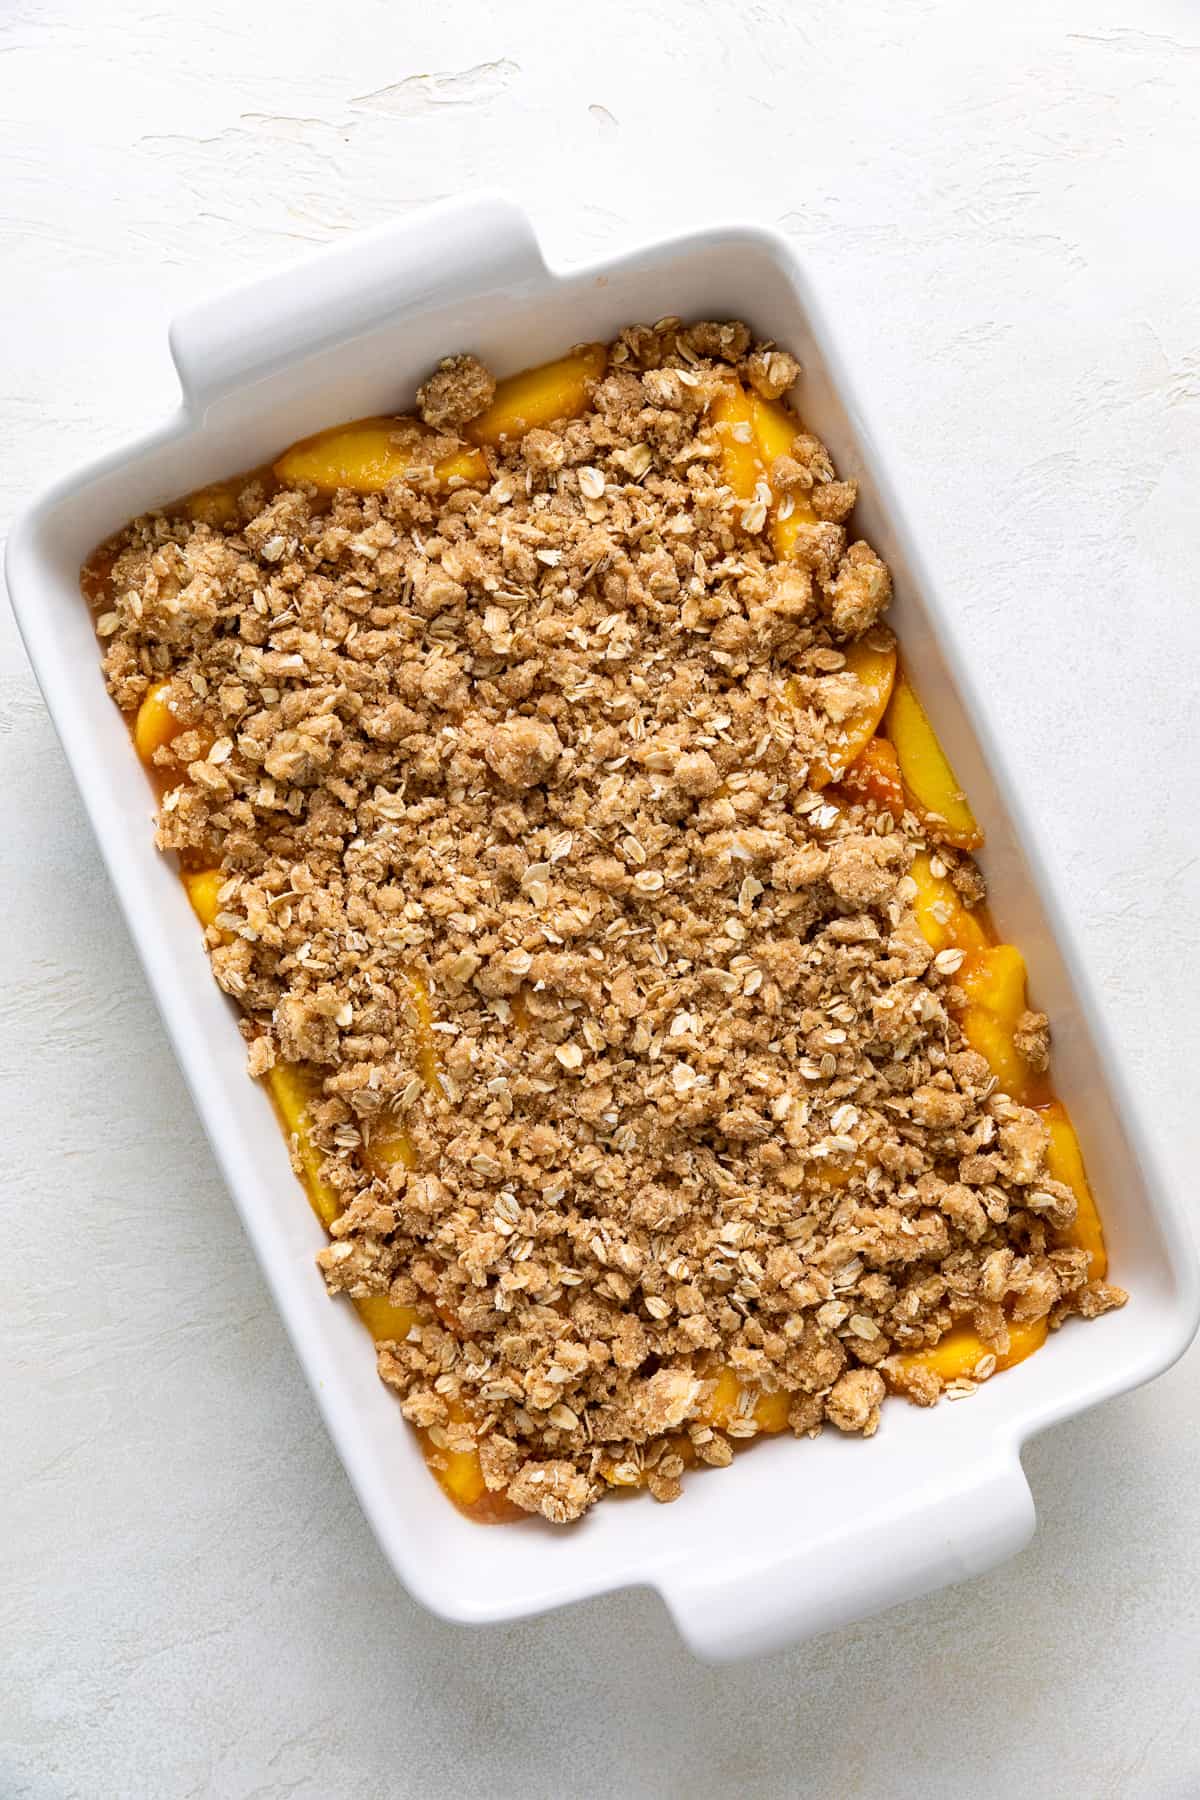 Crumble topping on top of peach filling in a pan.